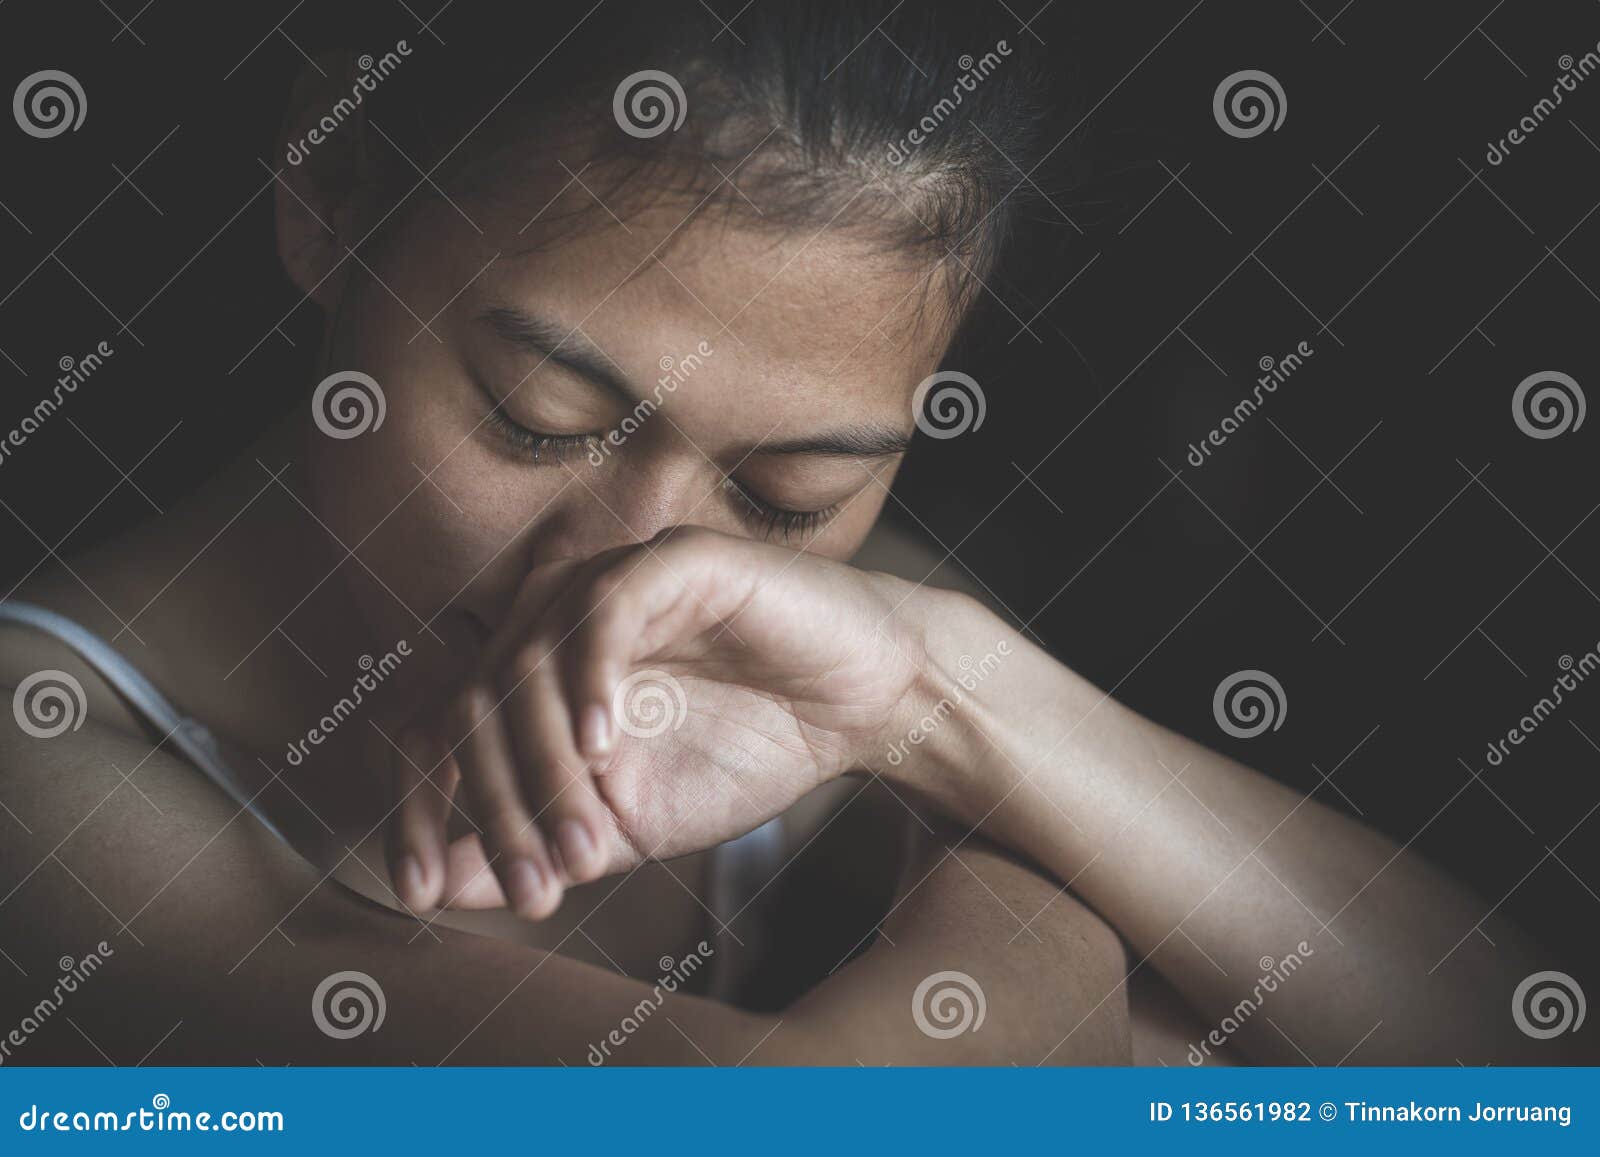 Sad Depressed Woman Suffering and from Family Life. Women Sitting ...